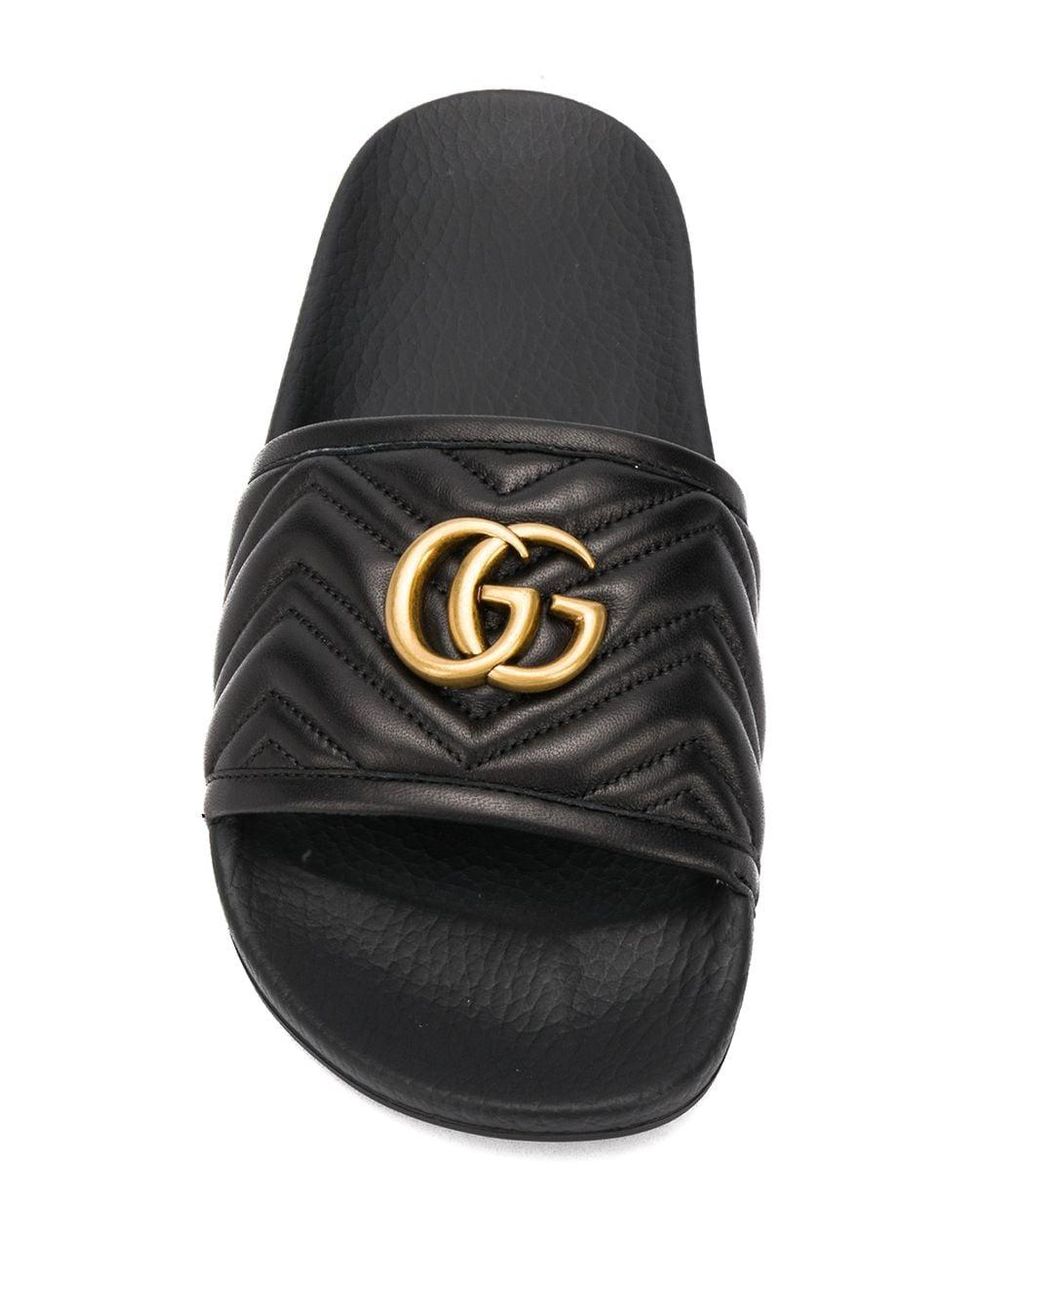 Gucci Gg Marmont Sliders in Black | Lyst